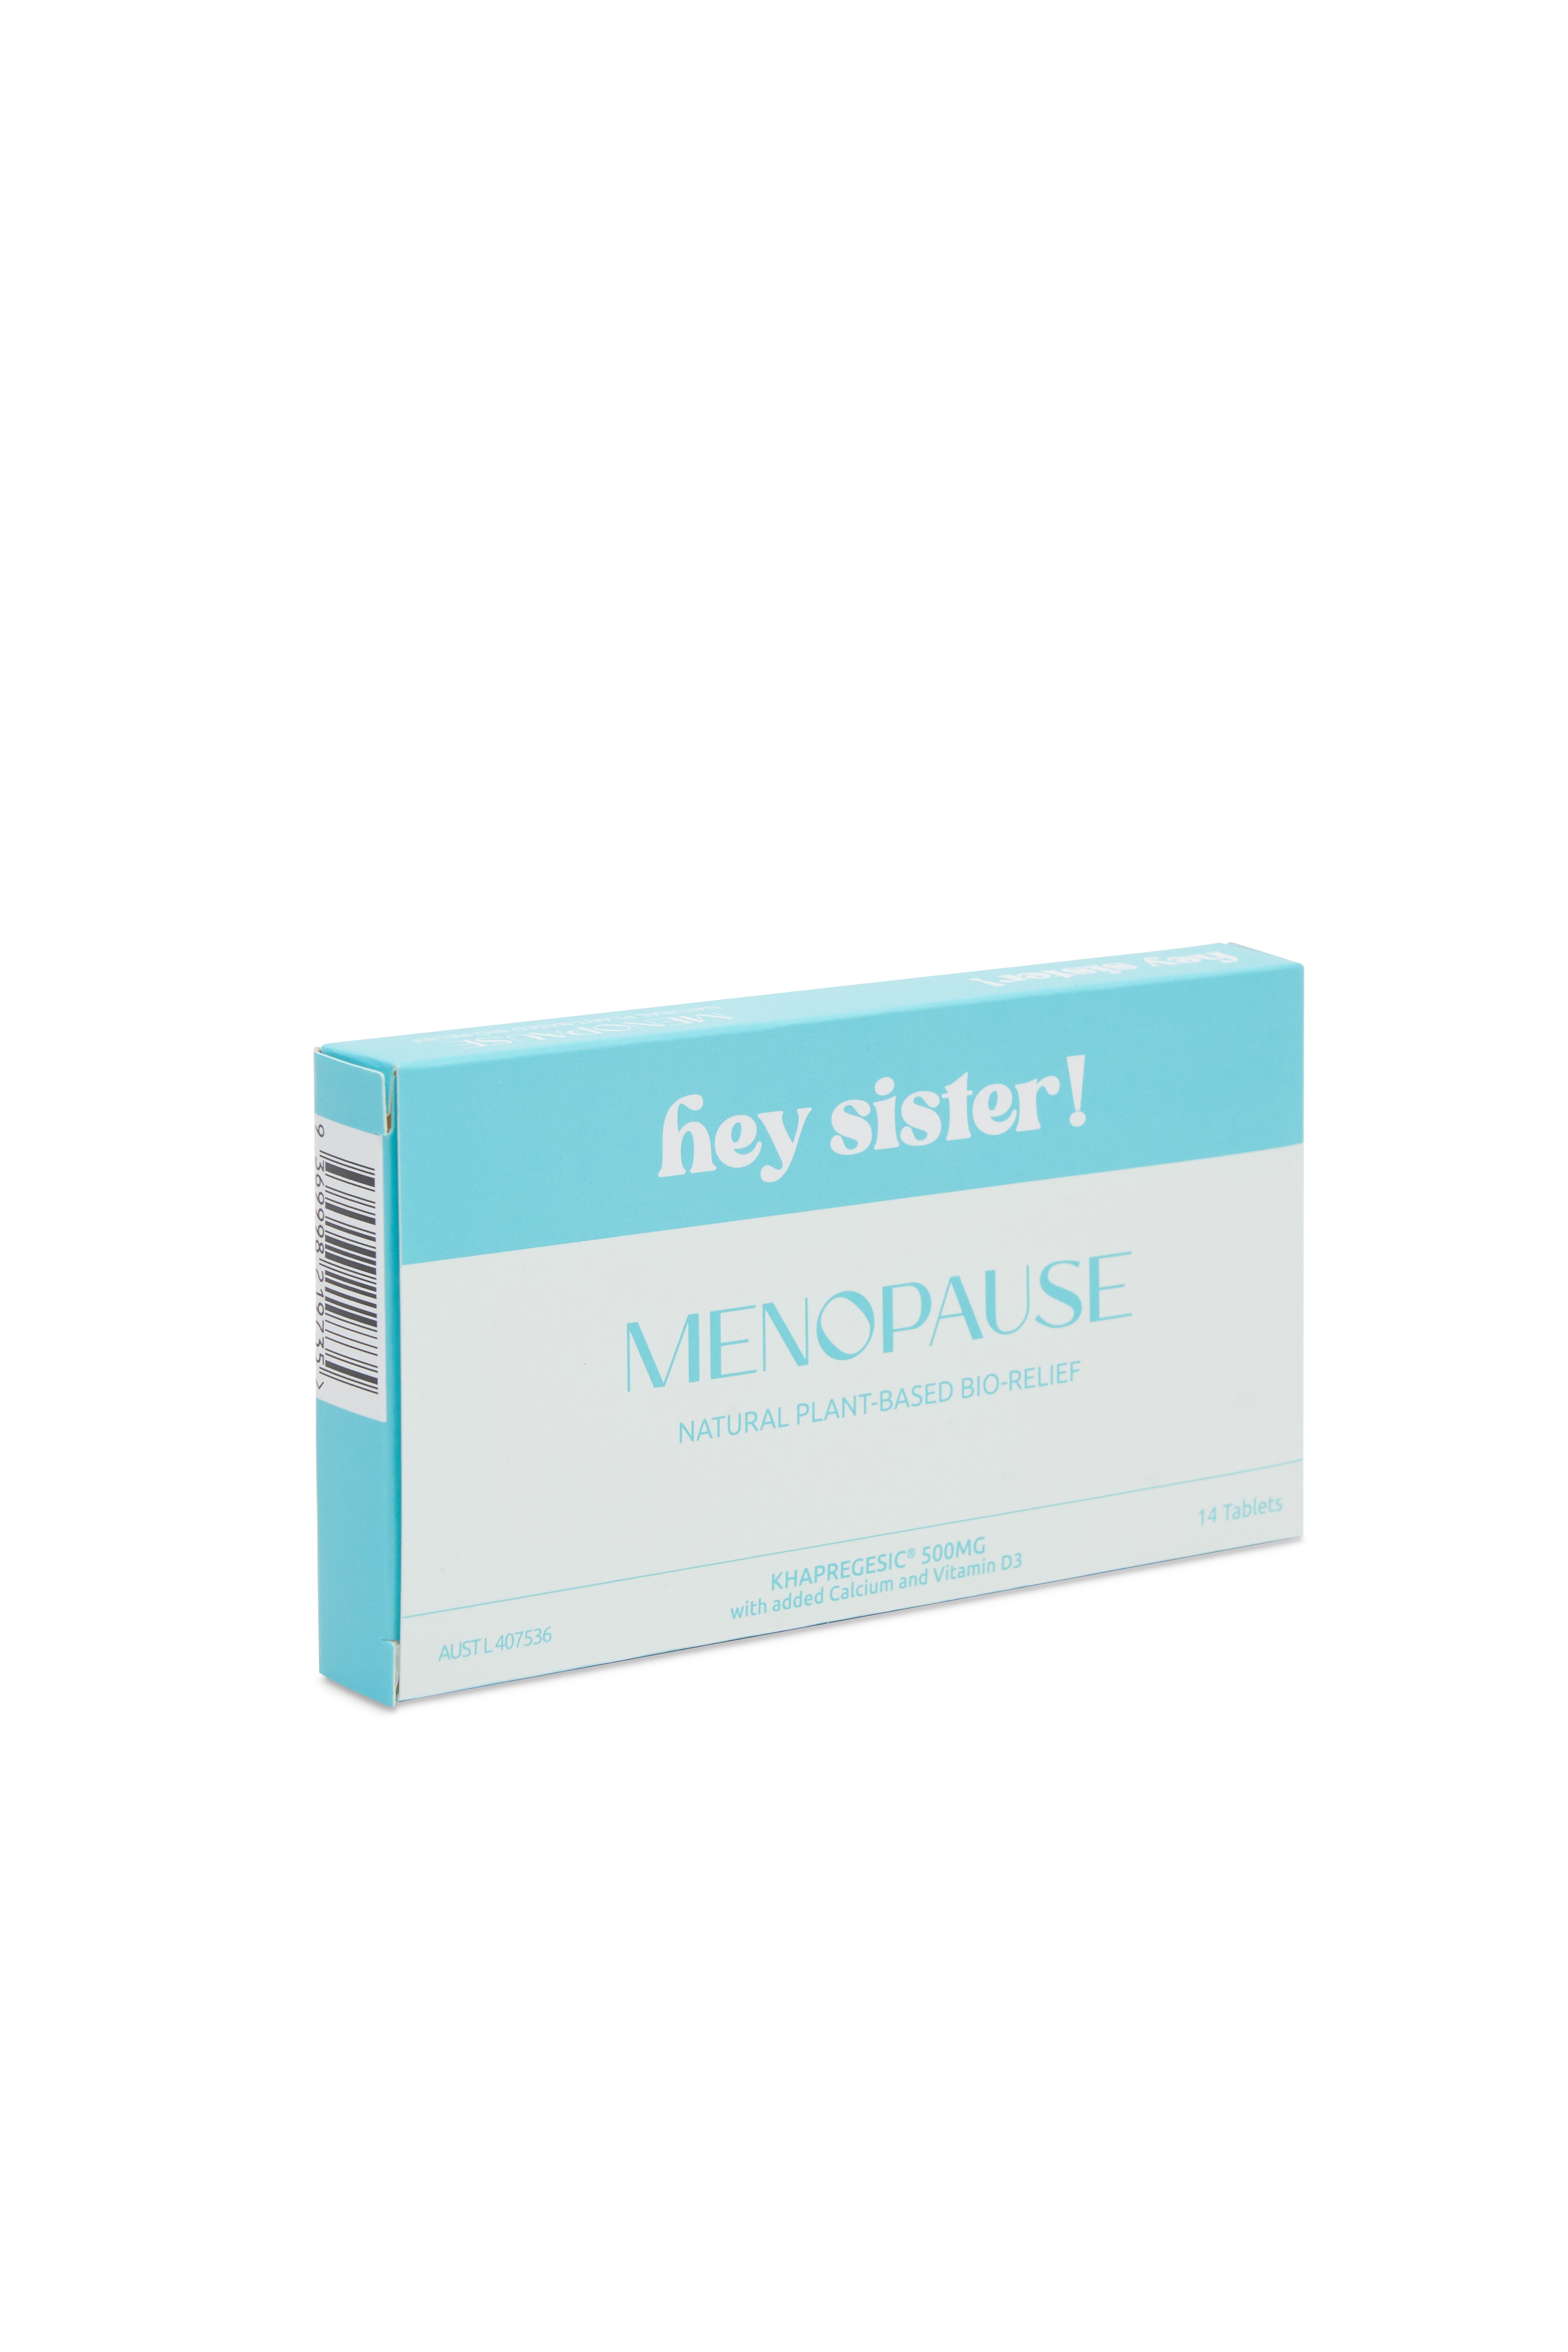 Hey Sister! Menopause - Flare Up Pack